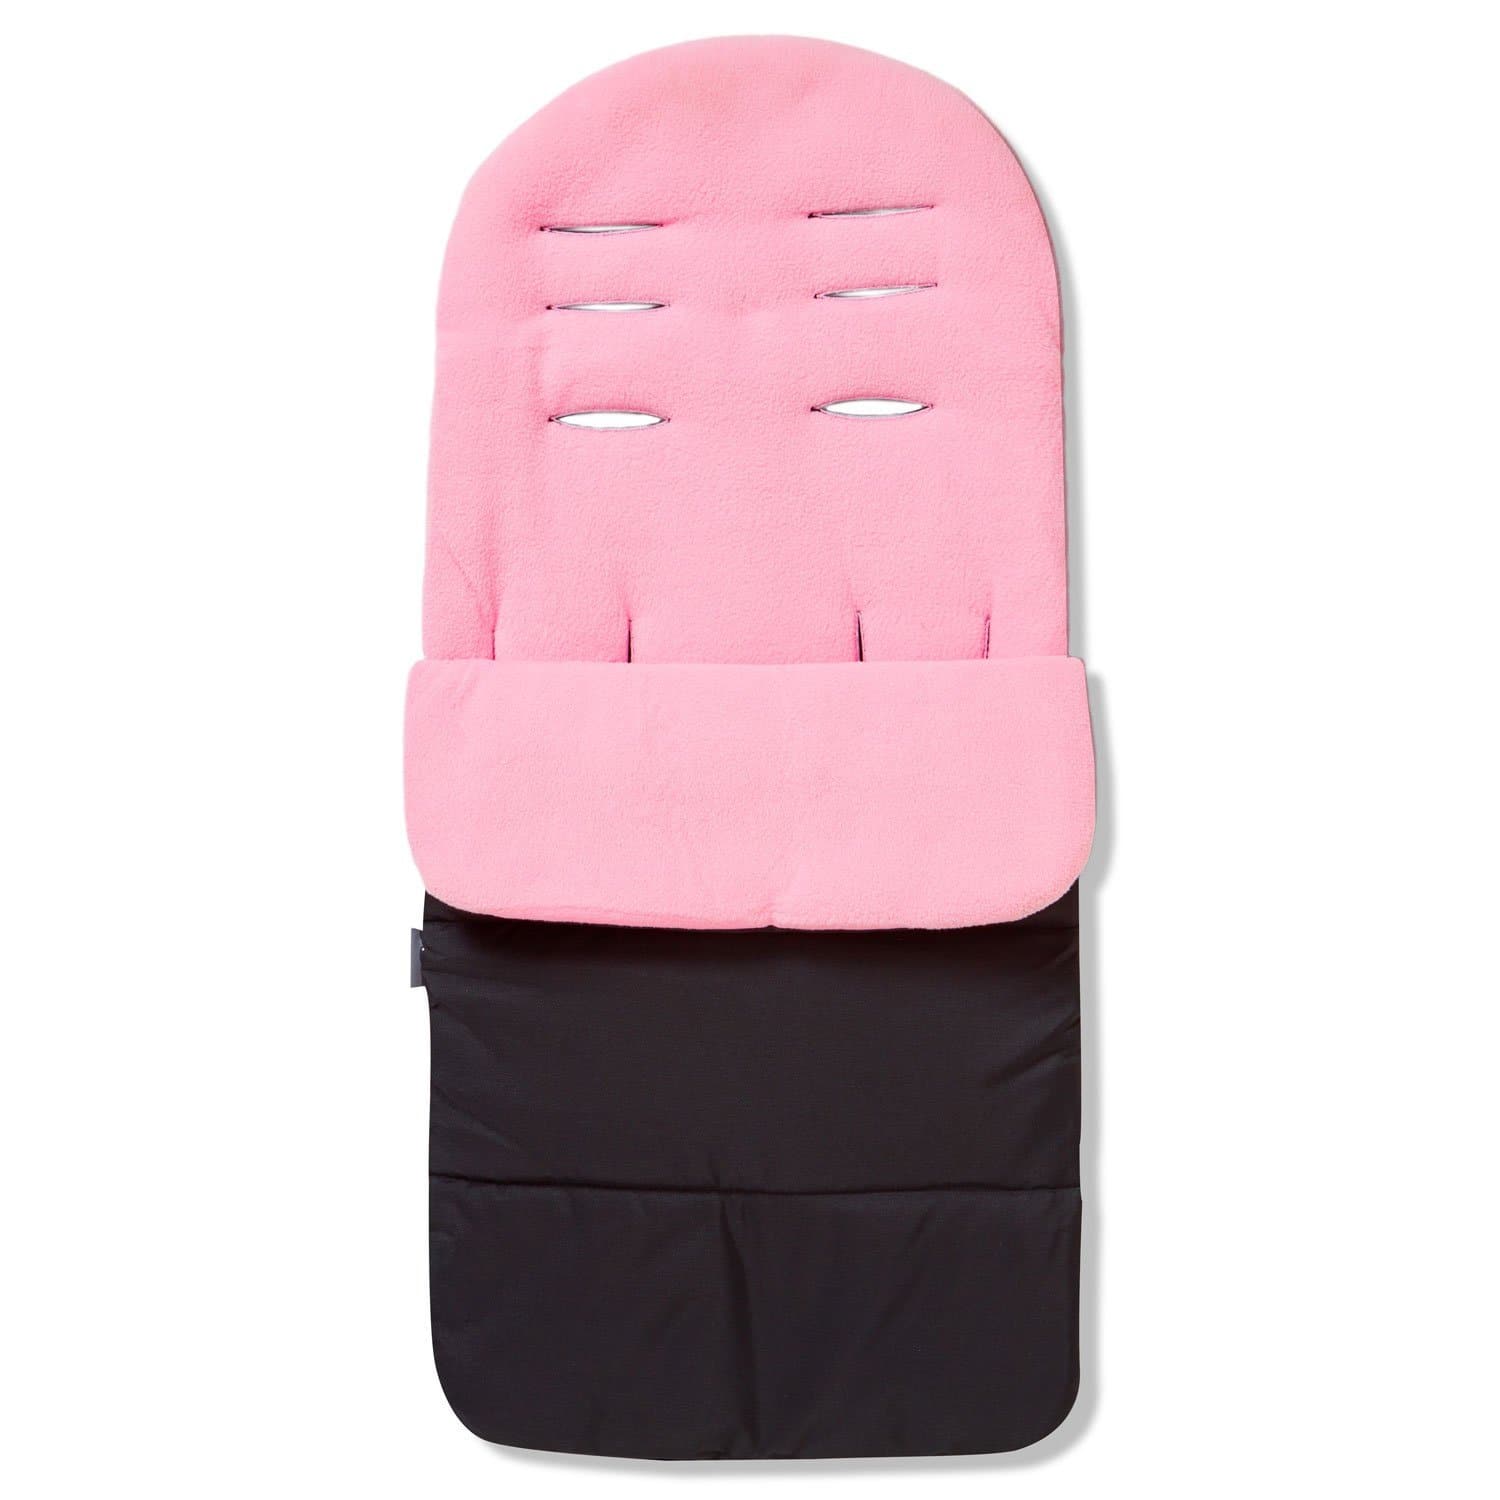 Premium Footmuff / Cosy Toes Compatible with Mee-Go - Candy Pink / Fits All Models | For Your Little One